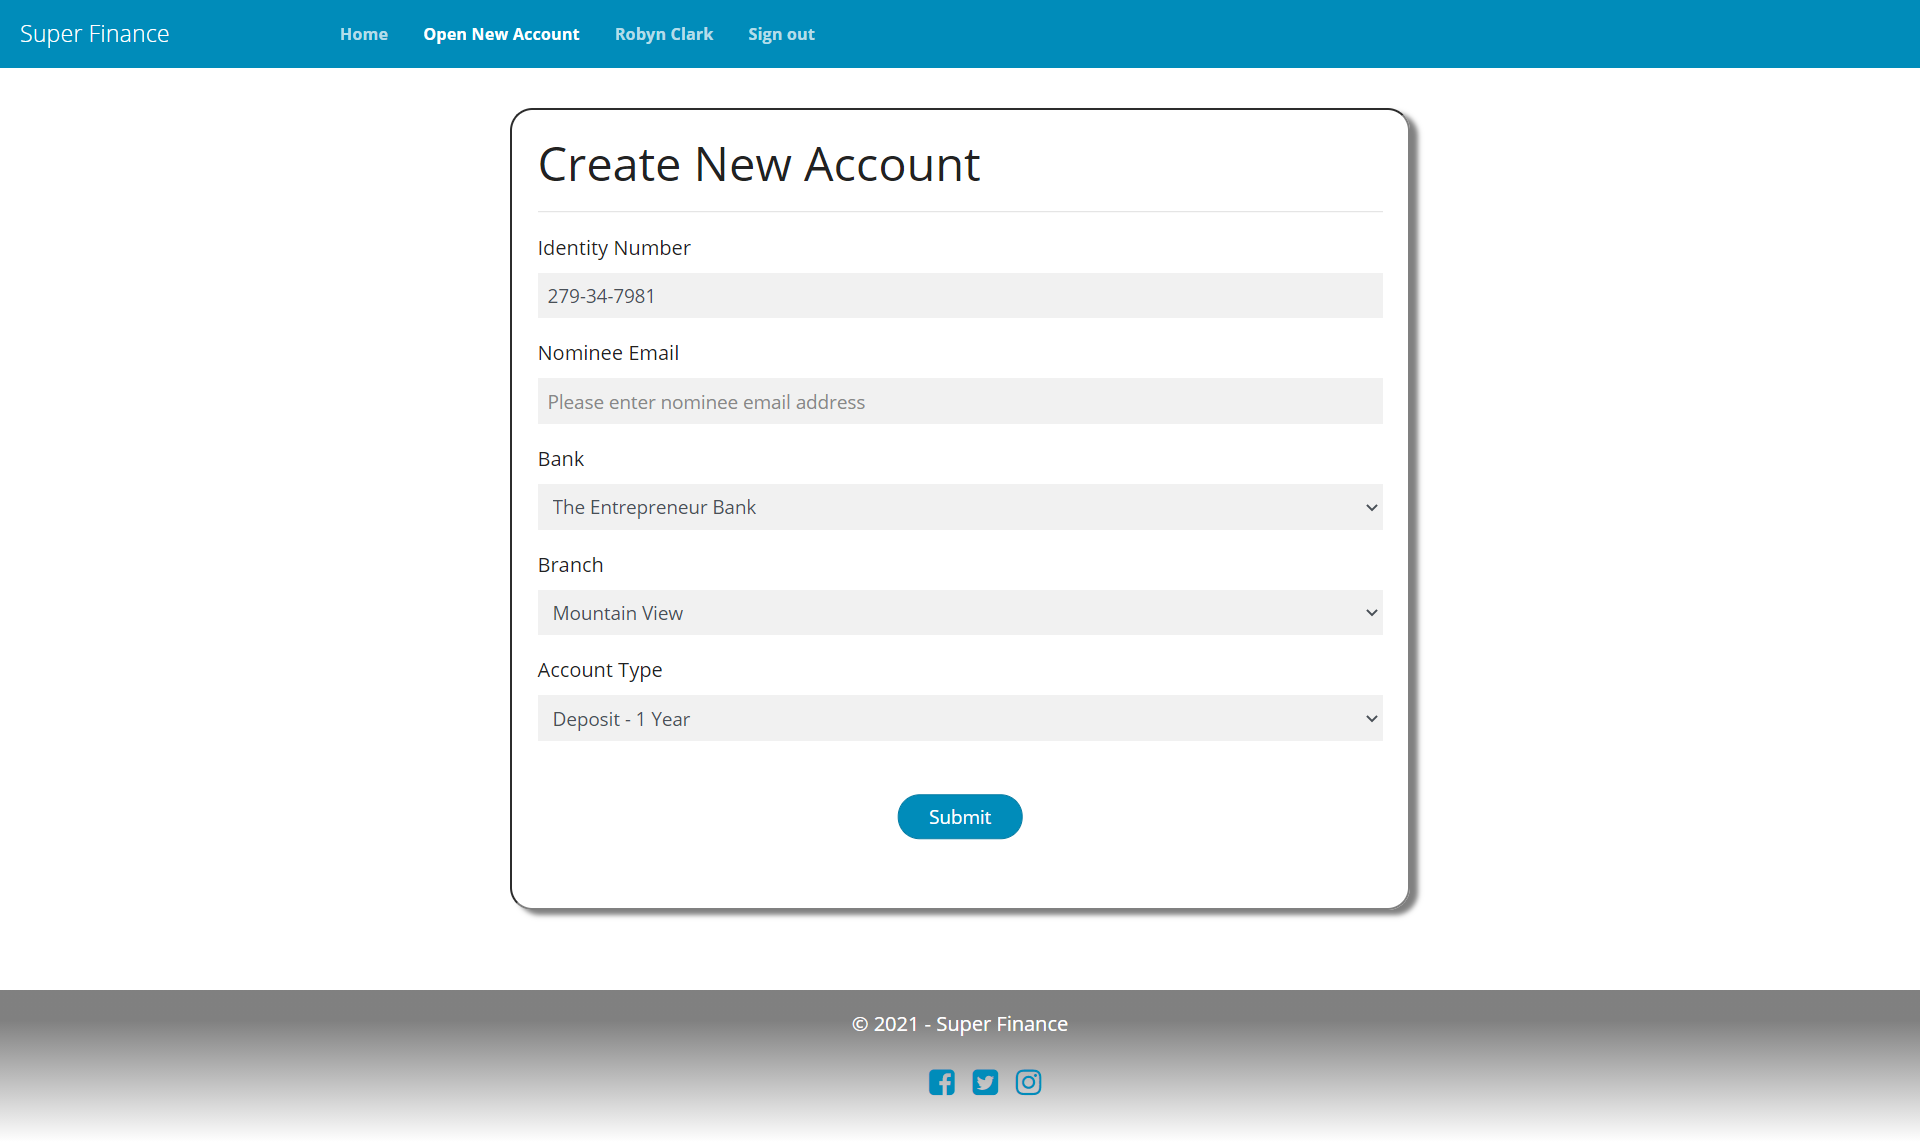 SuperFinance open new account page for customer